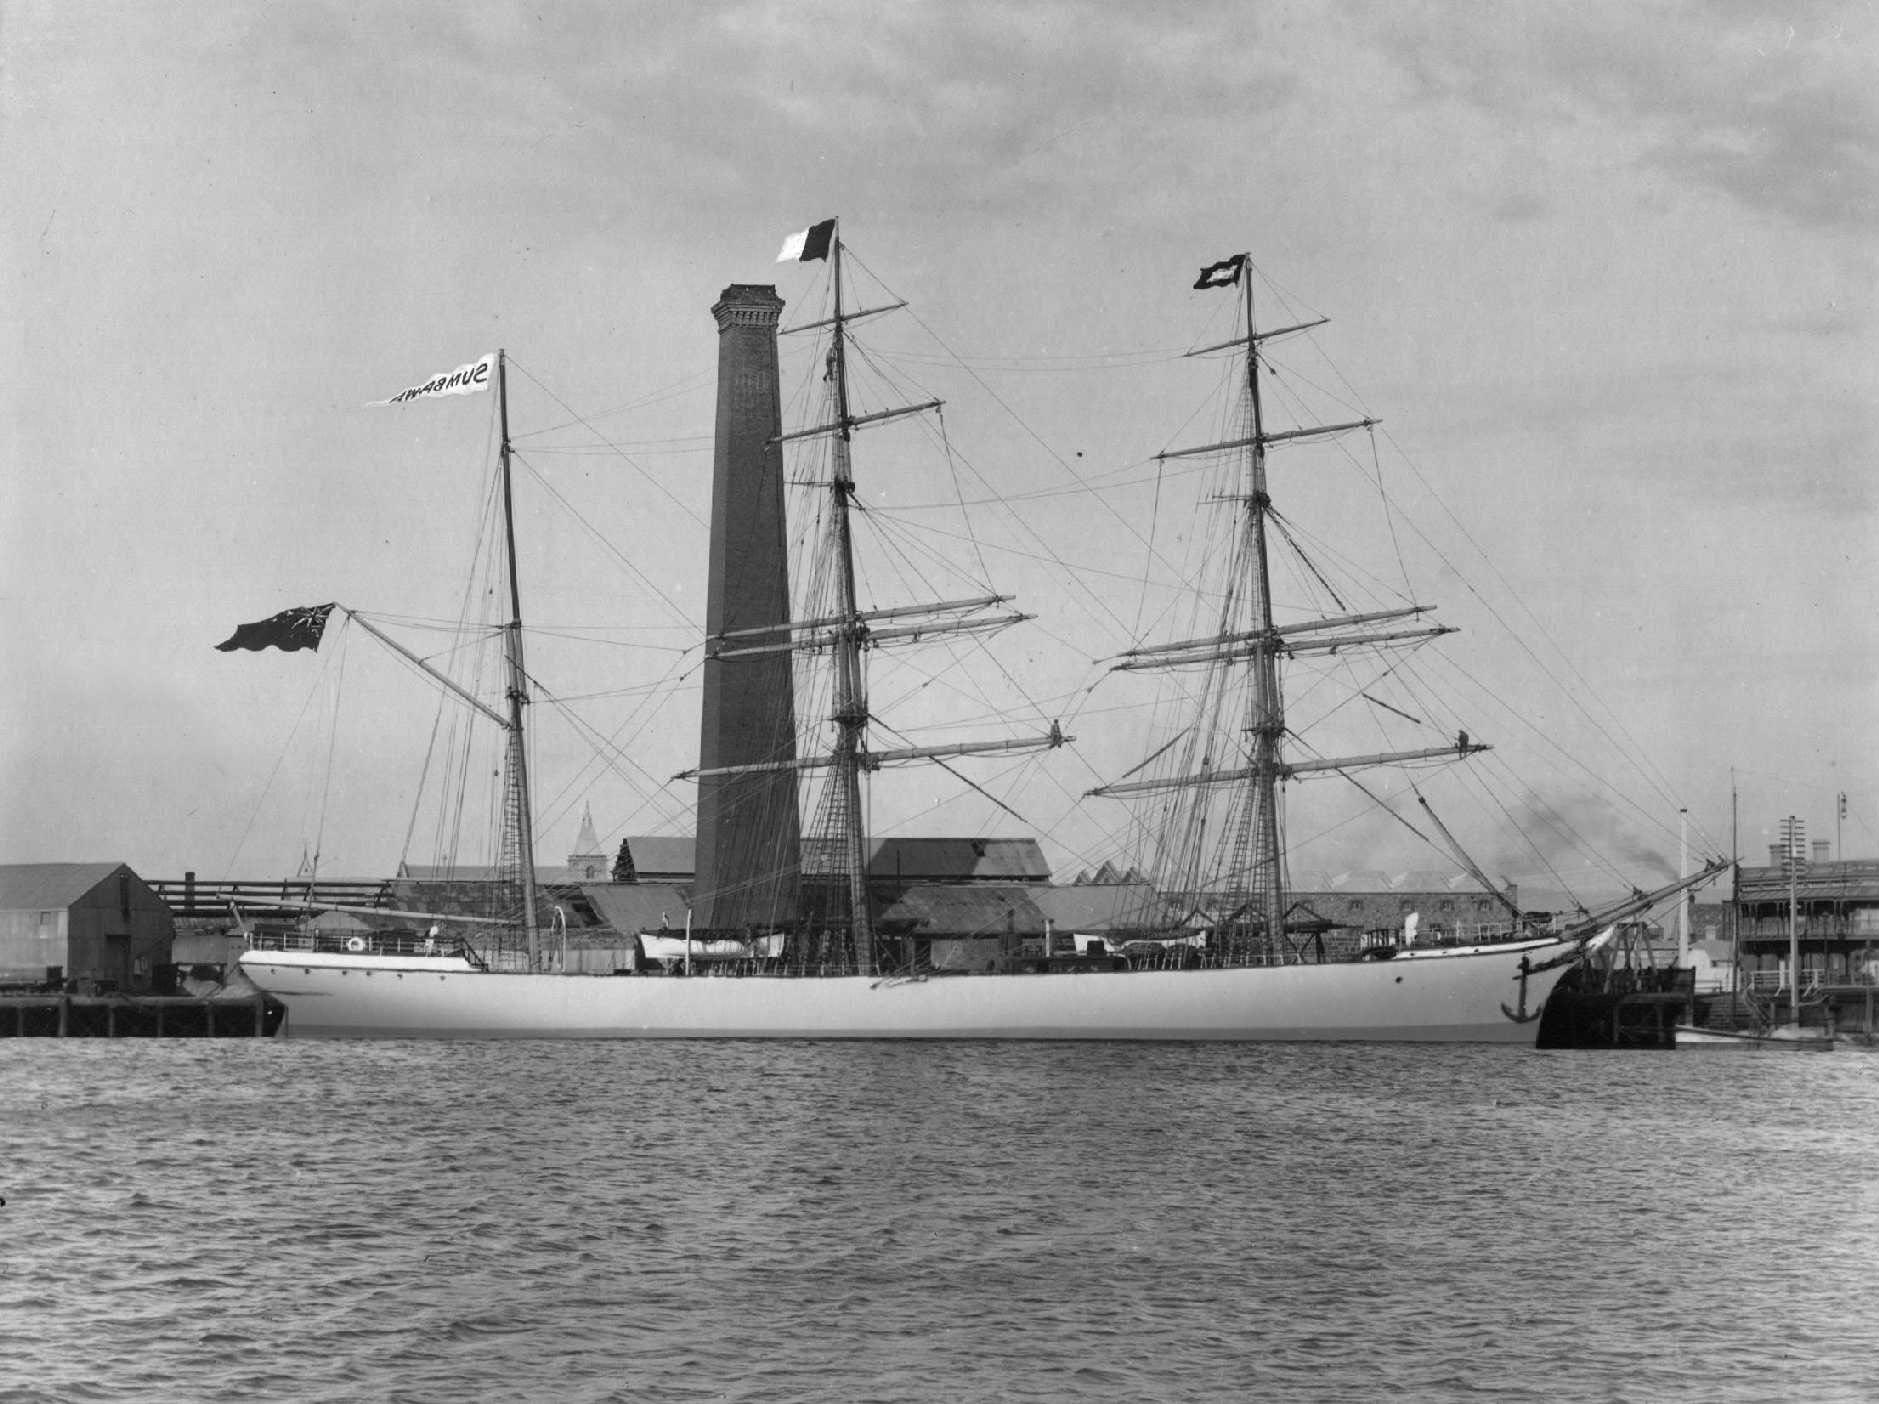 Barque "Sumbawa", built in 1885 at Glasgow by Russel & Co.
Official Number:  87420
Tonnage:  1147 gross
Dimensions:  Length 215', breadth 35', draught 21'